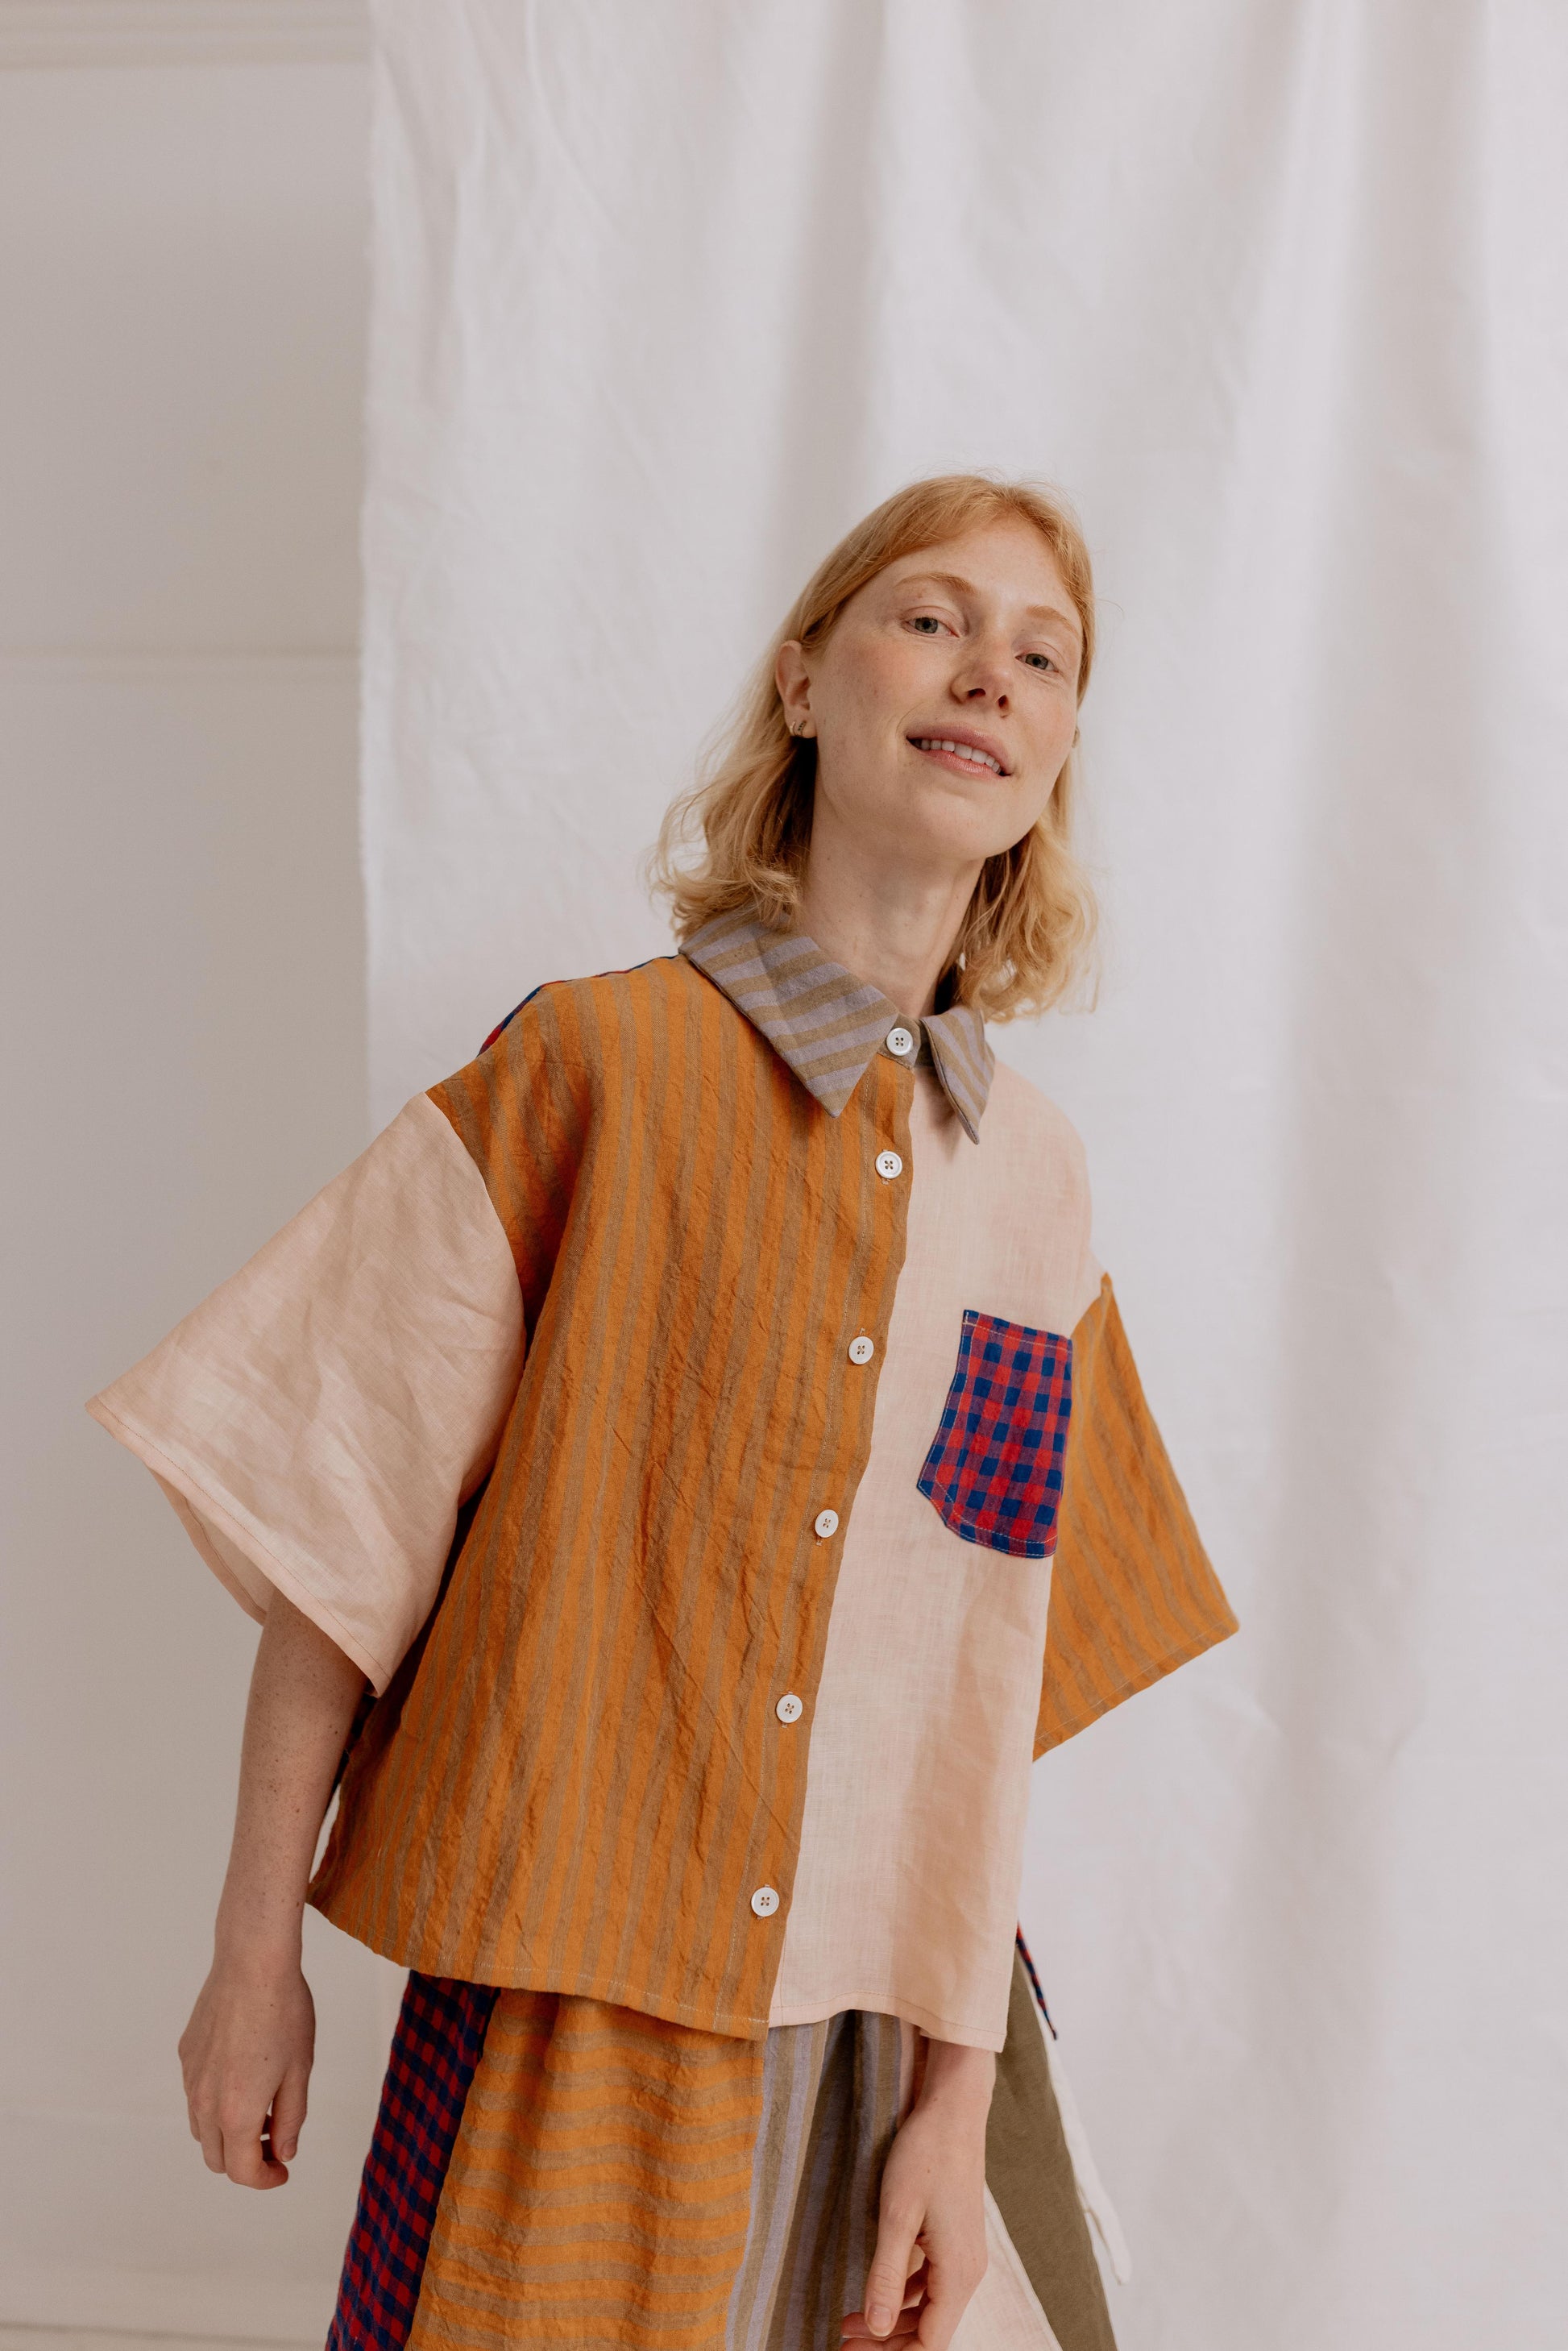 THE LINEN ROOM SHIRT | This season we have introduced a new concept called The Linen Room Project Born out of our commitment to sustainability, we decided to rethink our design process and get creative with what we already have in 'The Linen Room'. Using